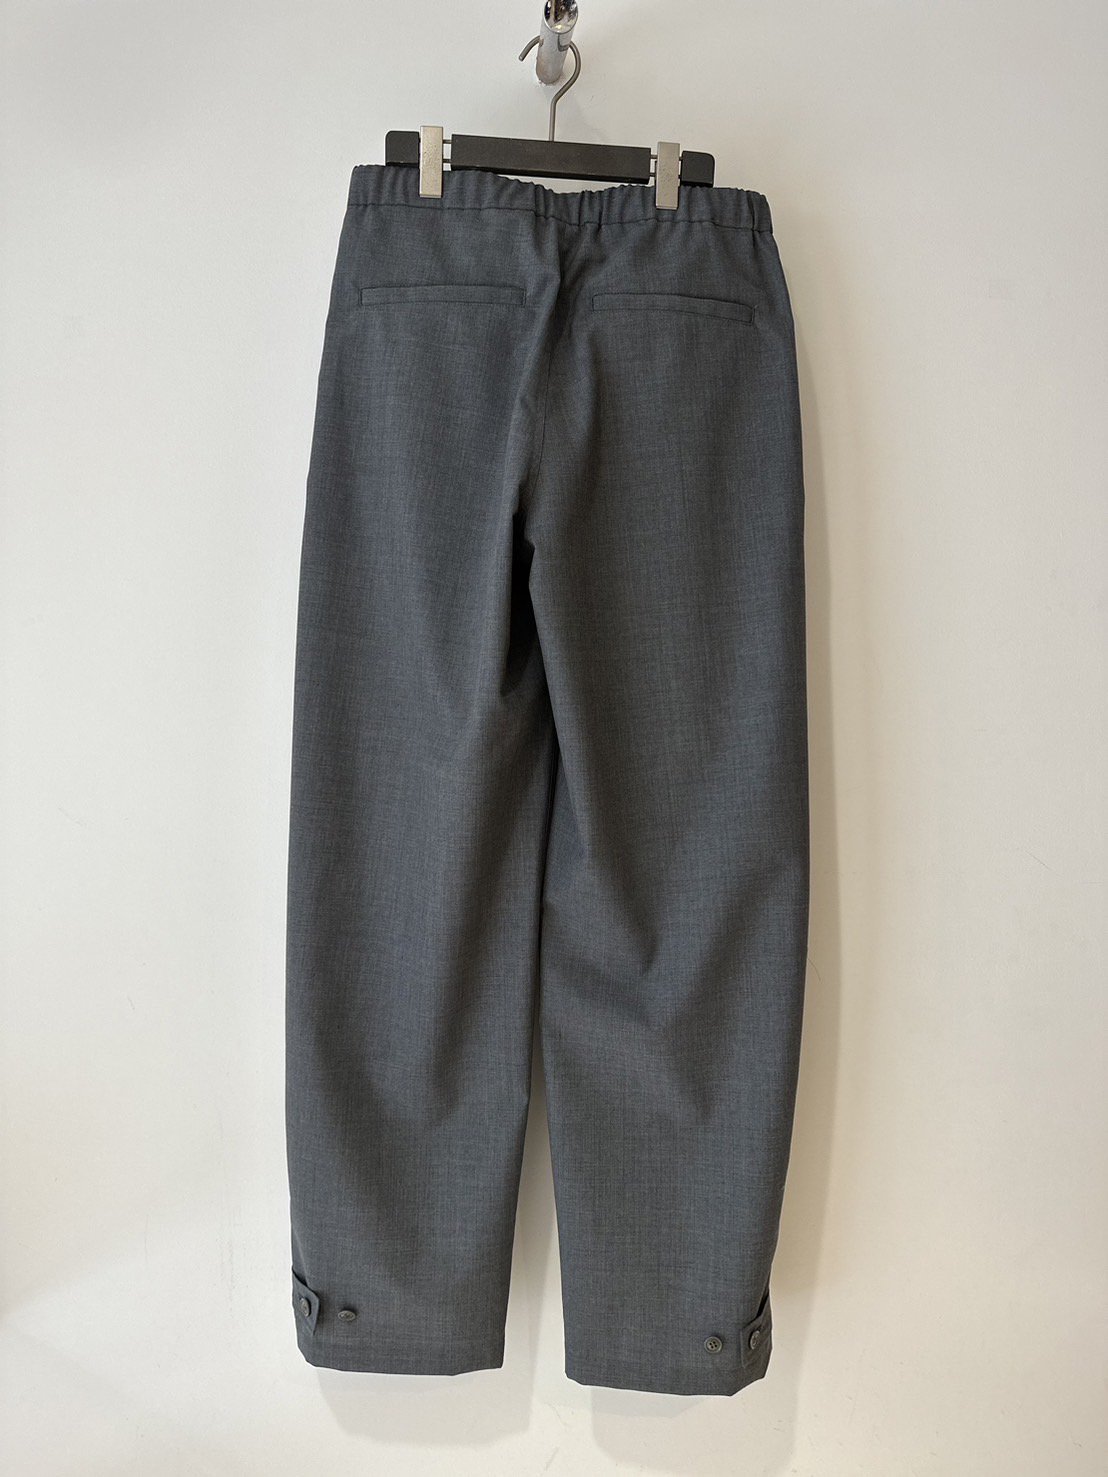 ALLEGE<br />Wool Easy Pants / Gray<img class='new_mark_img2' src='https://img.shop-pro.jp/img/new/icons14.gif' style='border:none;display:inline;margin:0px;padding:0px;width:auto;' />